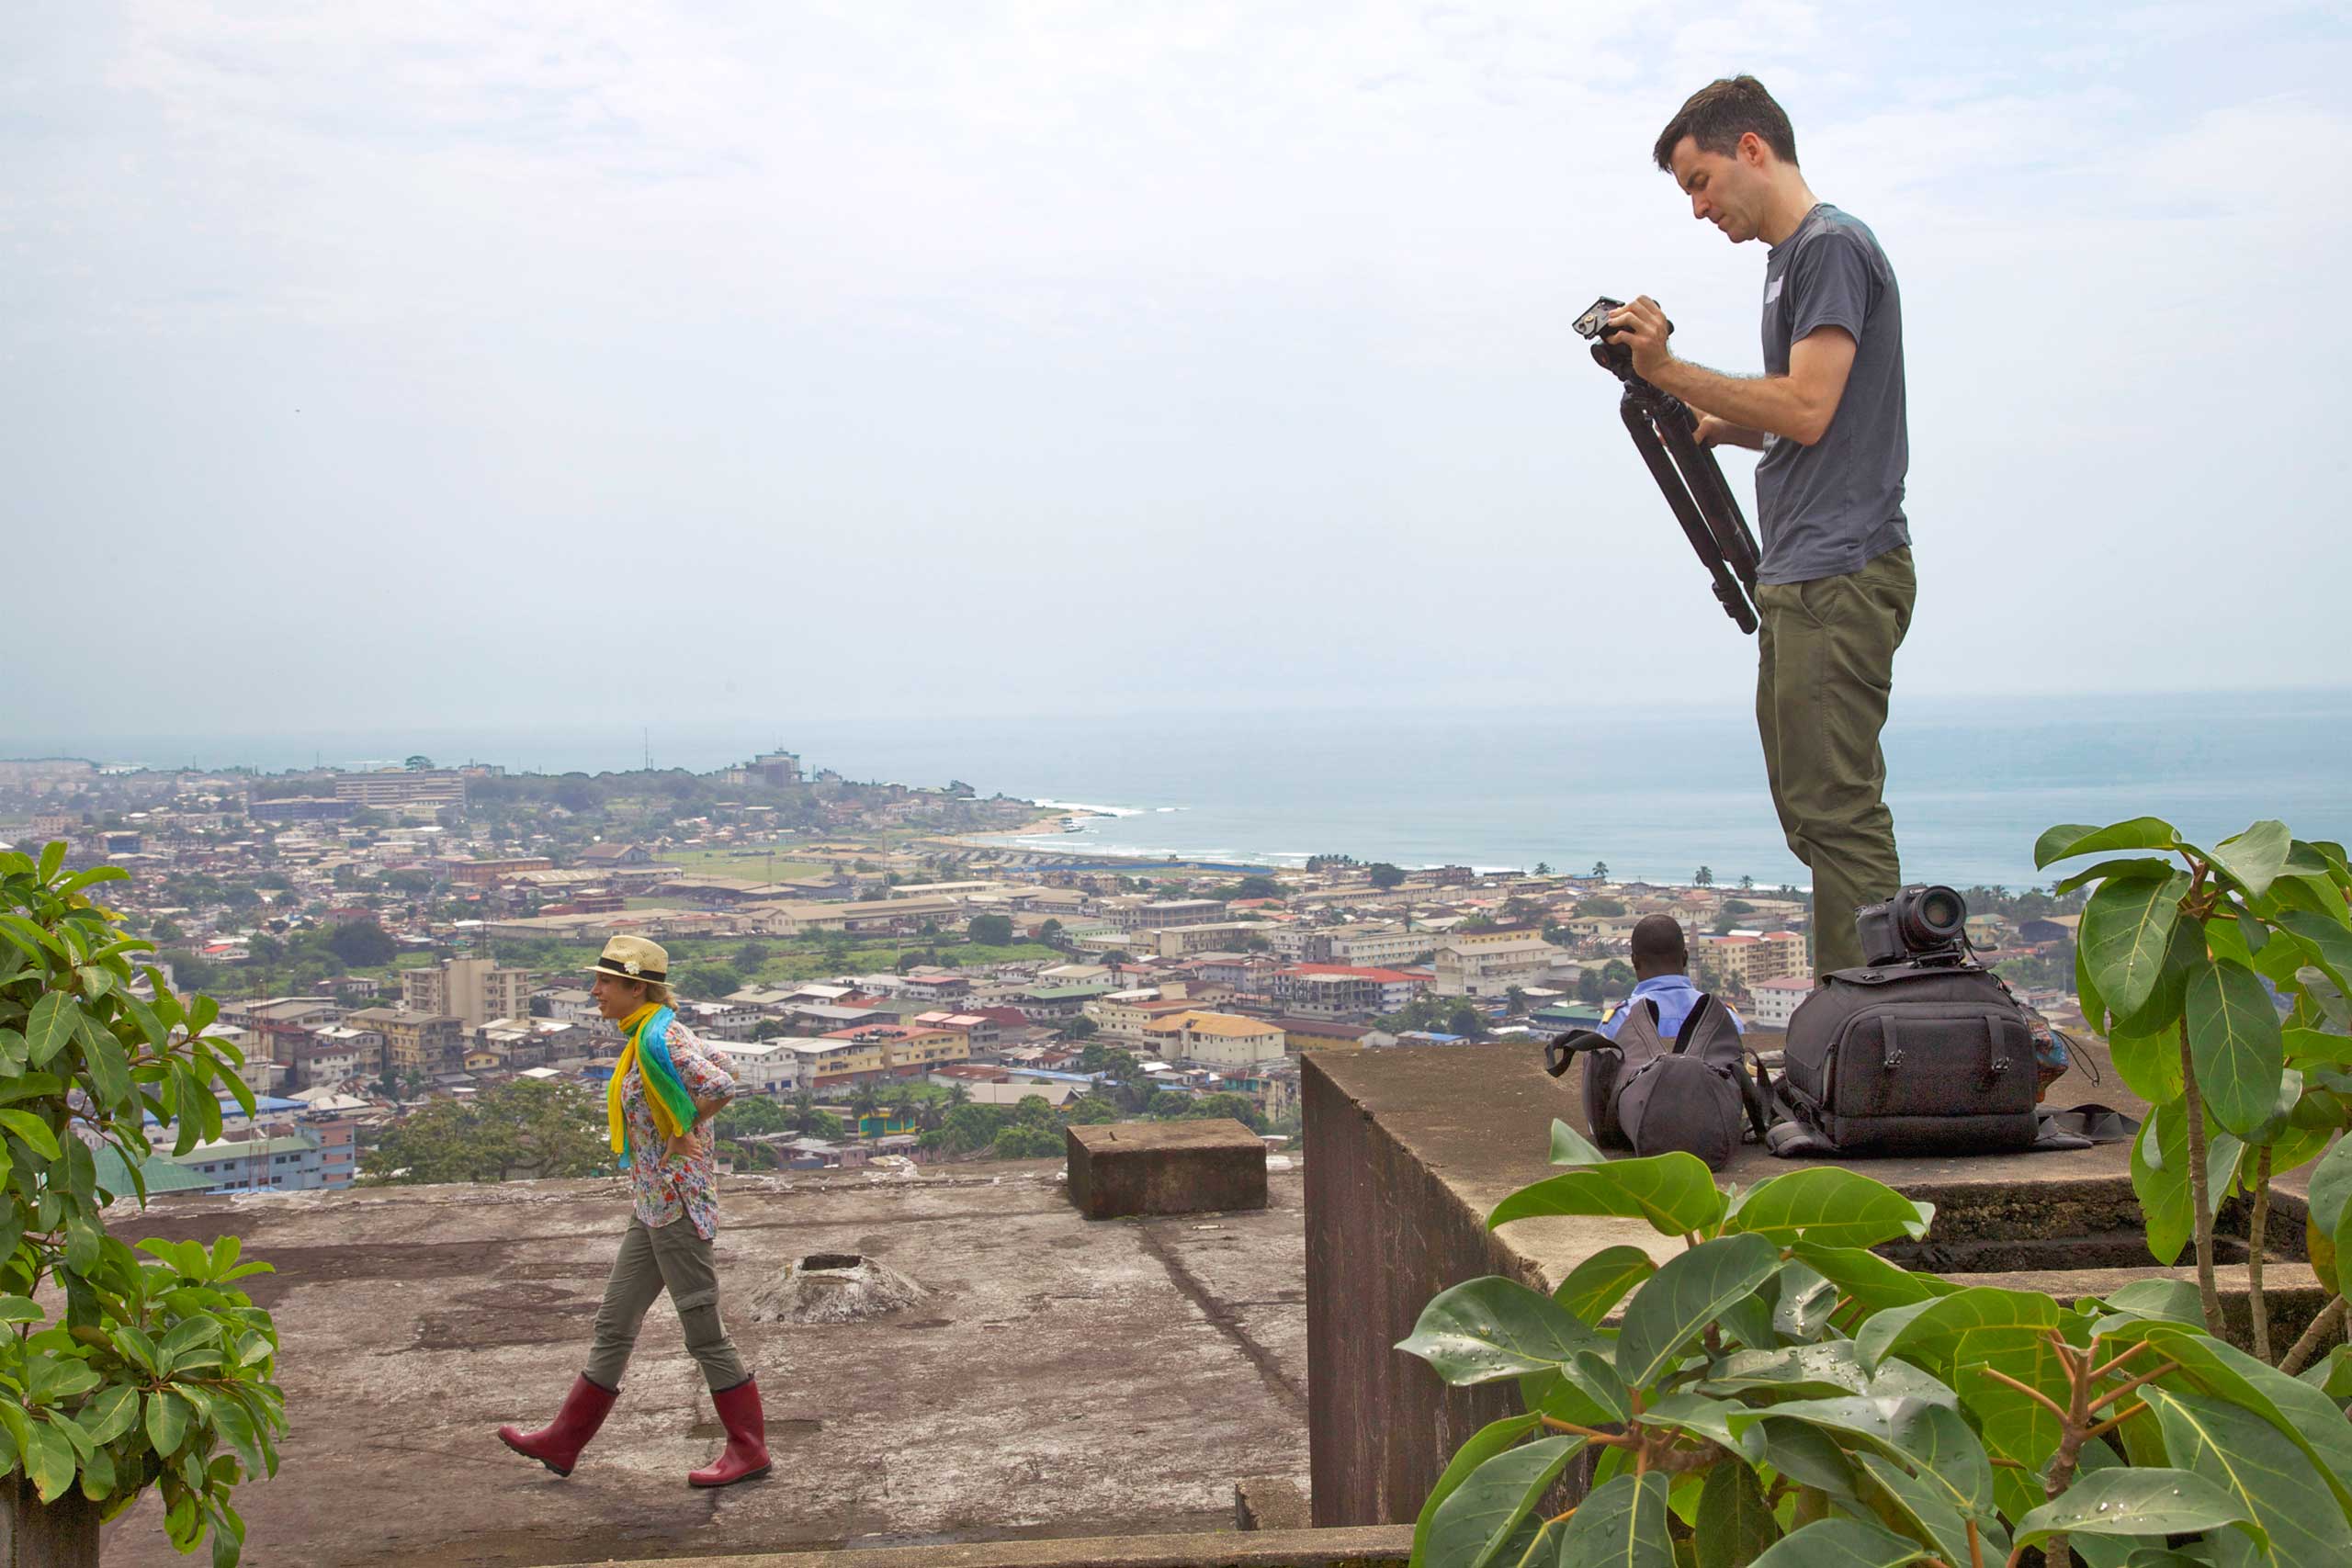 TIME's Deputy Director of Photography Paul Moakley (right) and TIME's Africa Bureau Chief Aryn Baker in Monrovia, Liberia (Jackie Nickerson for TIME)